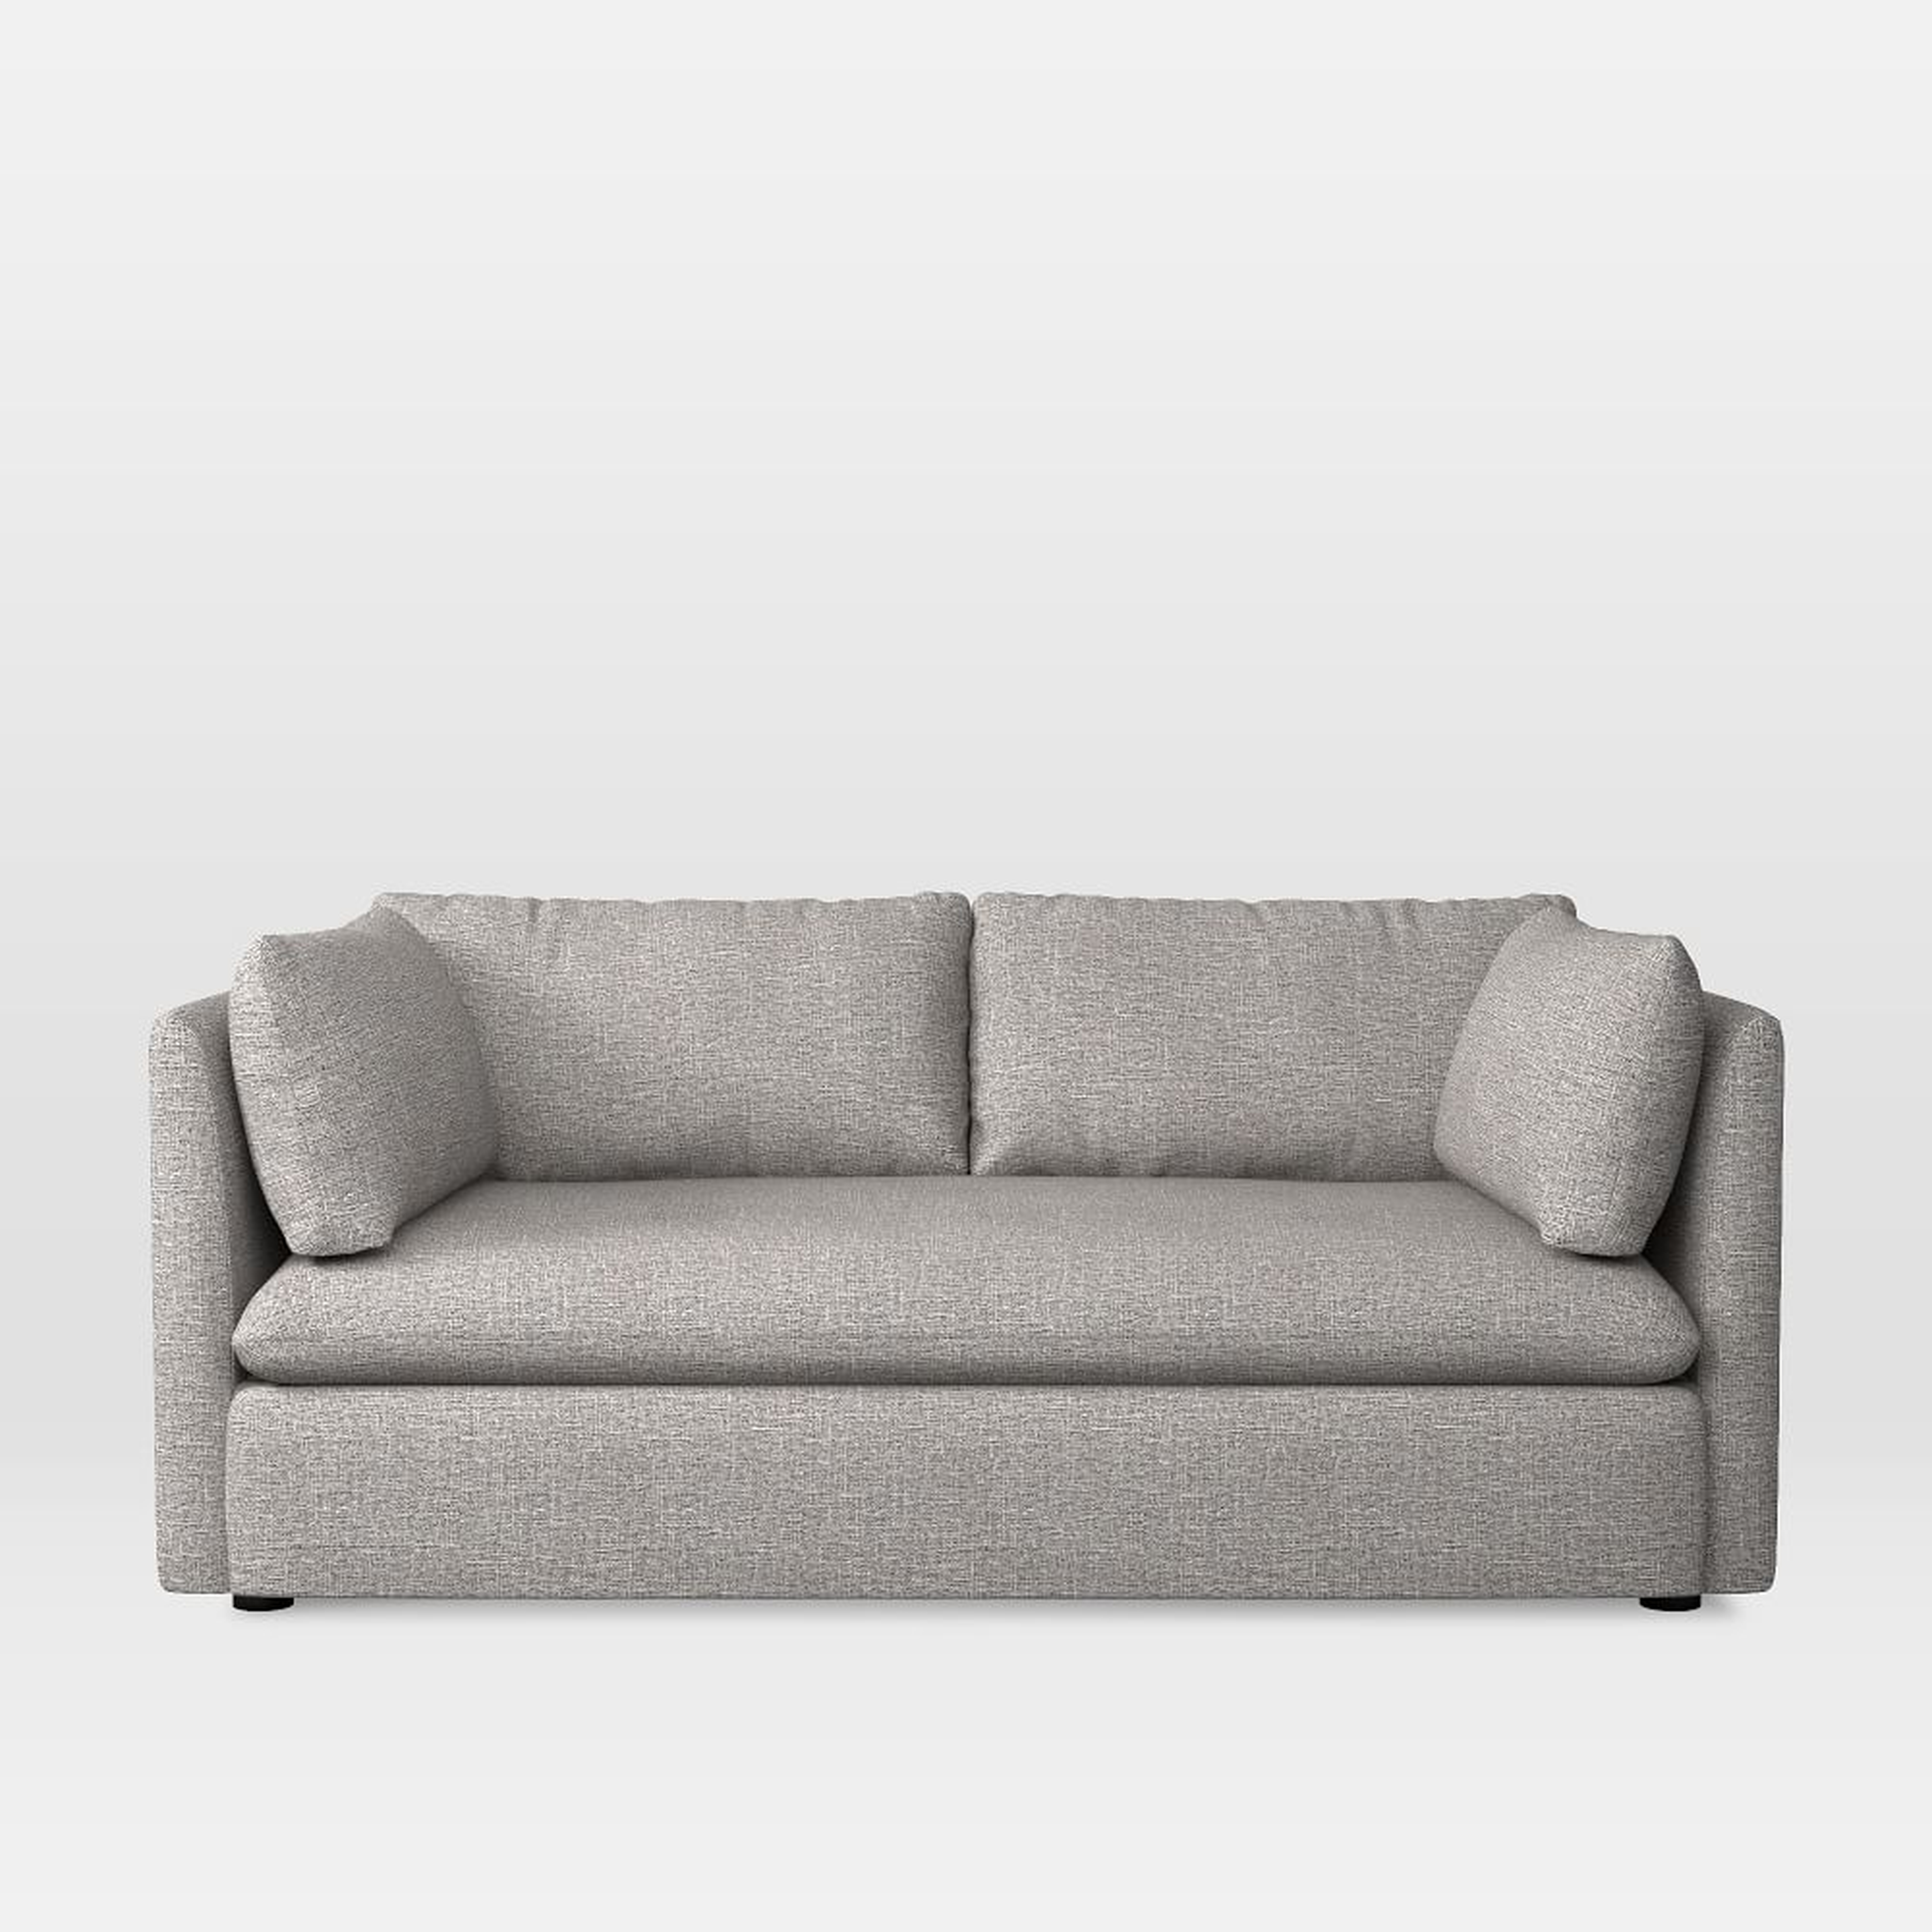 Shelter 72" Sofa, Deco Weave, Pearl Gray - West Elm